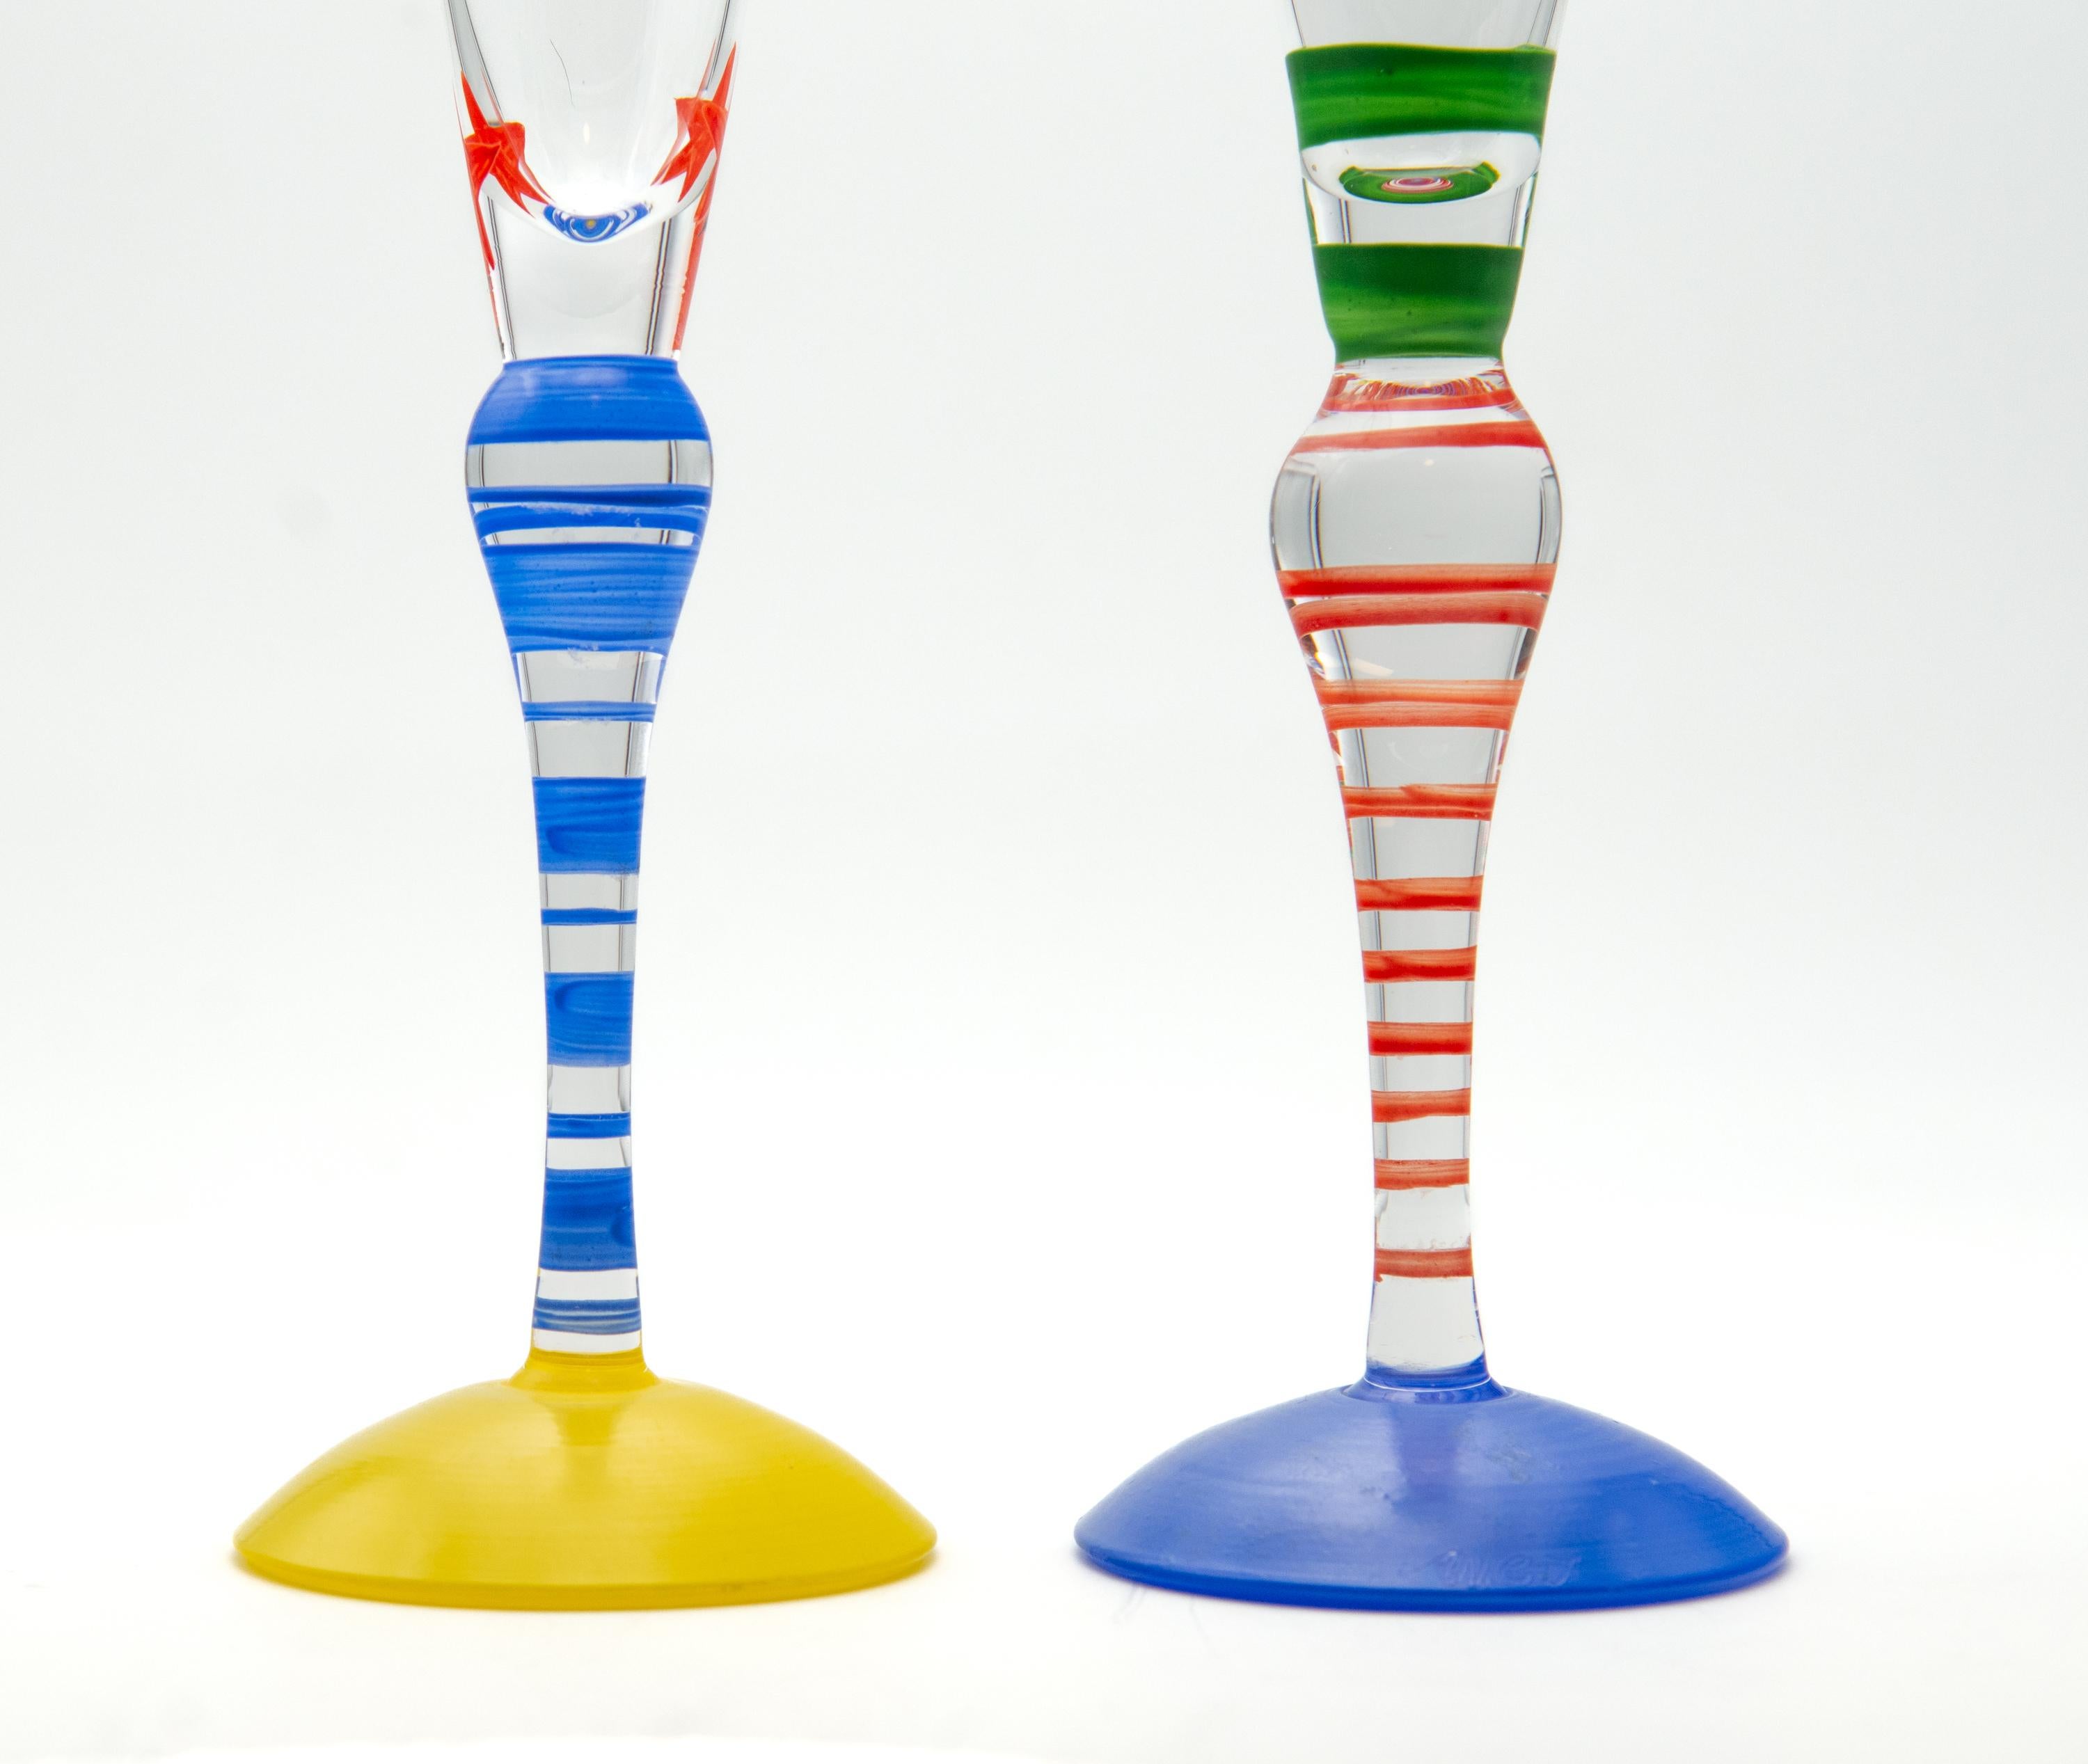 Two Orrefors crystal Clown series champagne flutes designed by Anne Nilsson in 1992 and hand polychrome painted by the artist. Signed.

Delivery included to the mainland UK.

They are in excellent condition, slight smudge on one of the green painted